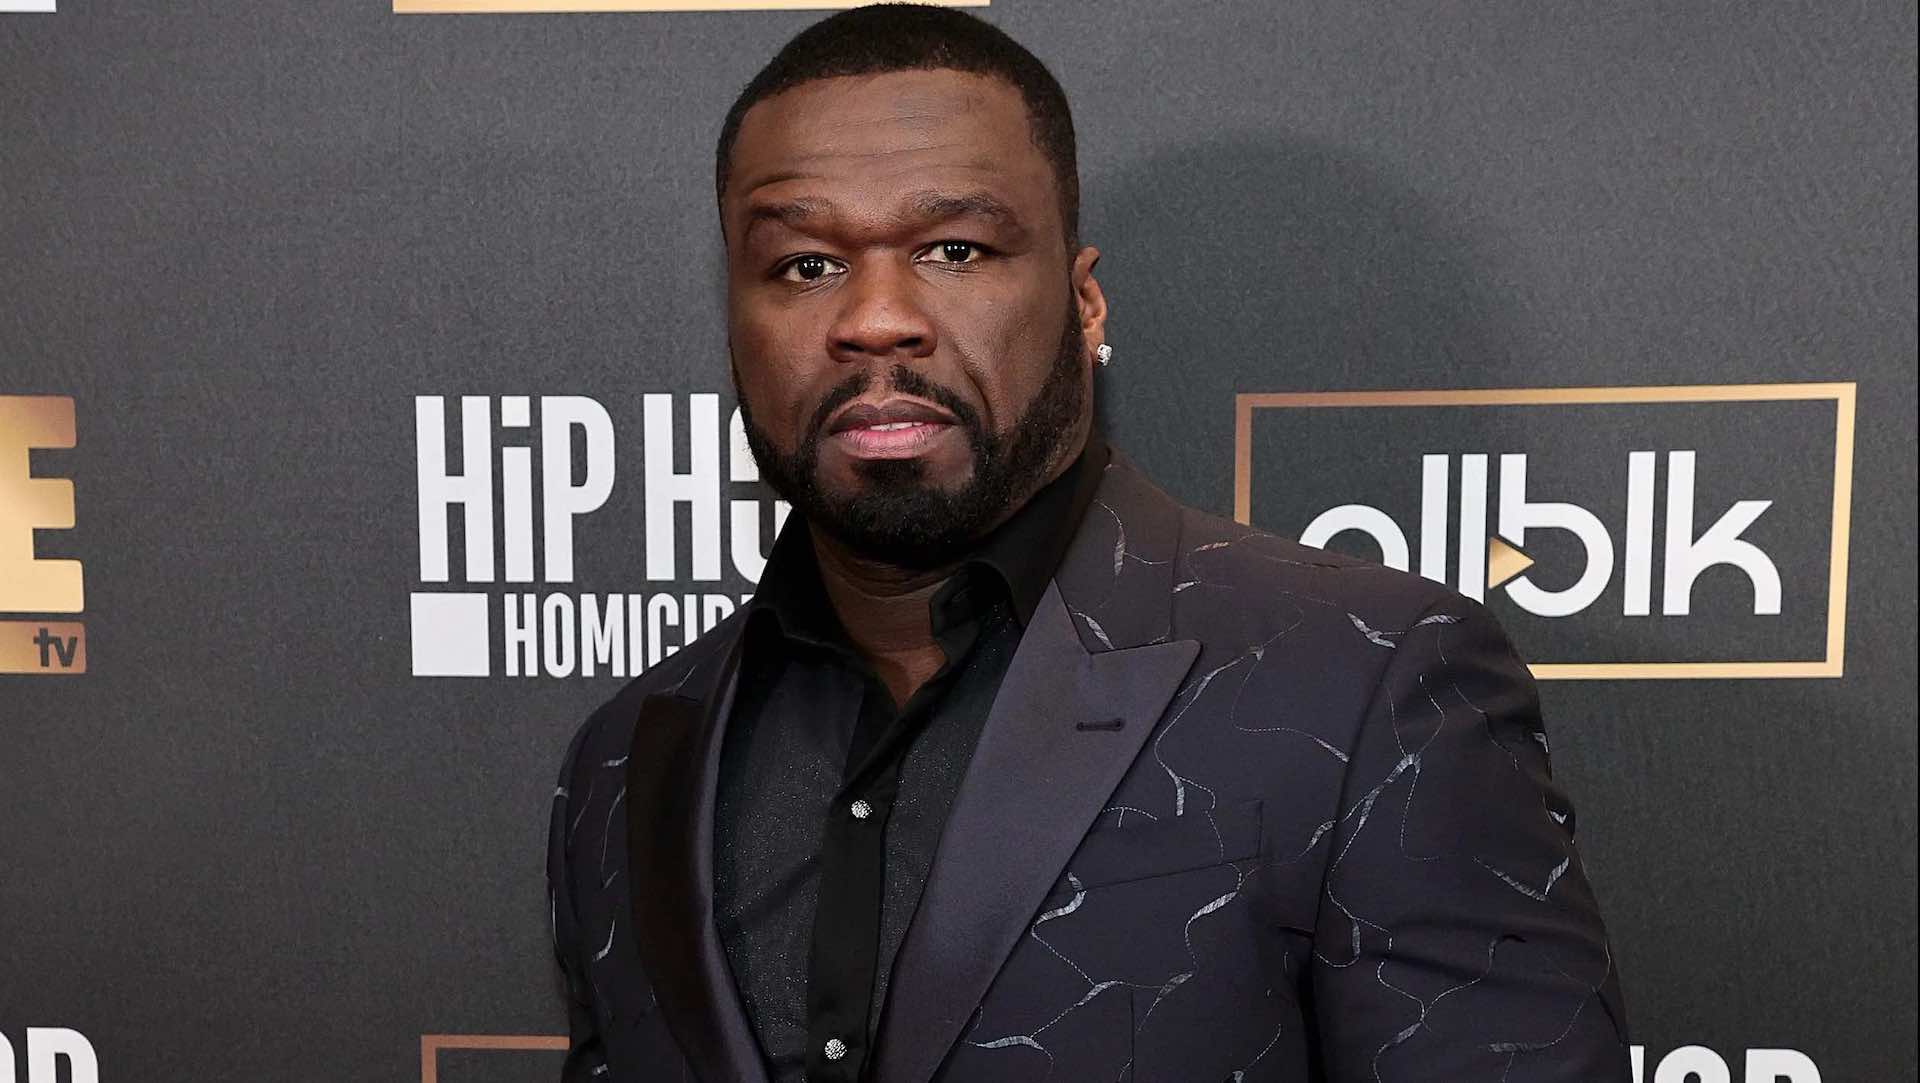 Will abuse claims take a bite out of 50 Cent's net worth? Surf our insightful wave as we explore this scandal's impact on the rapper’s financial status!